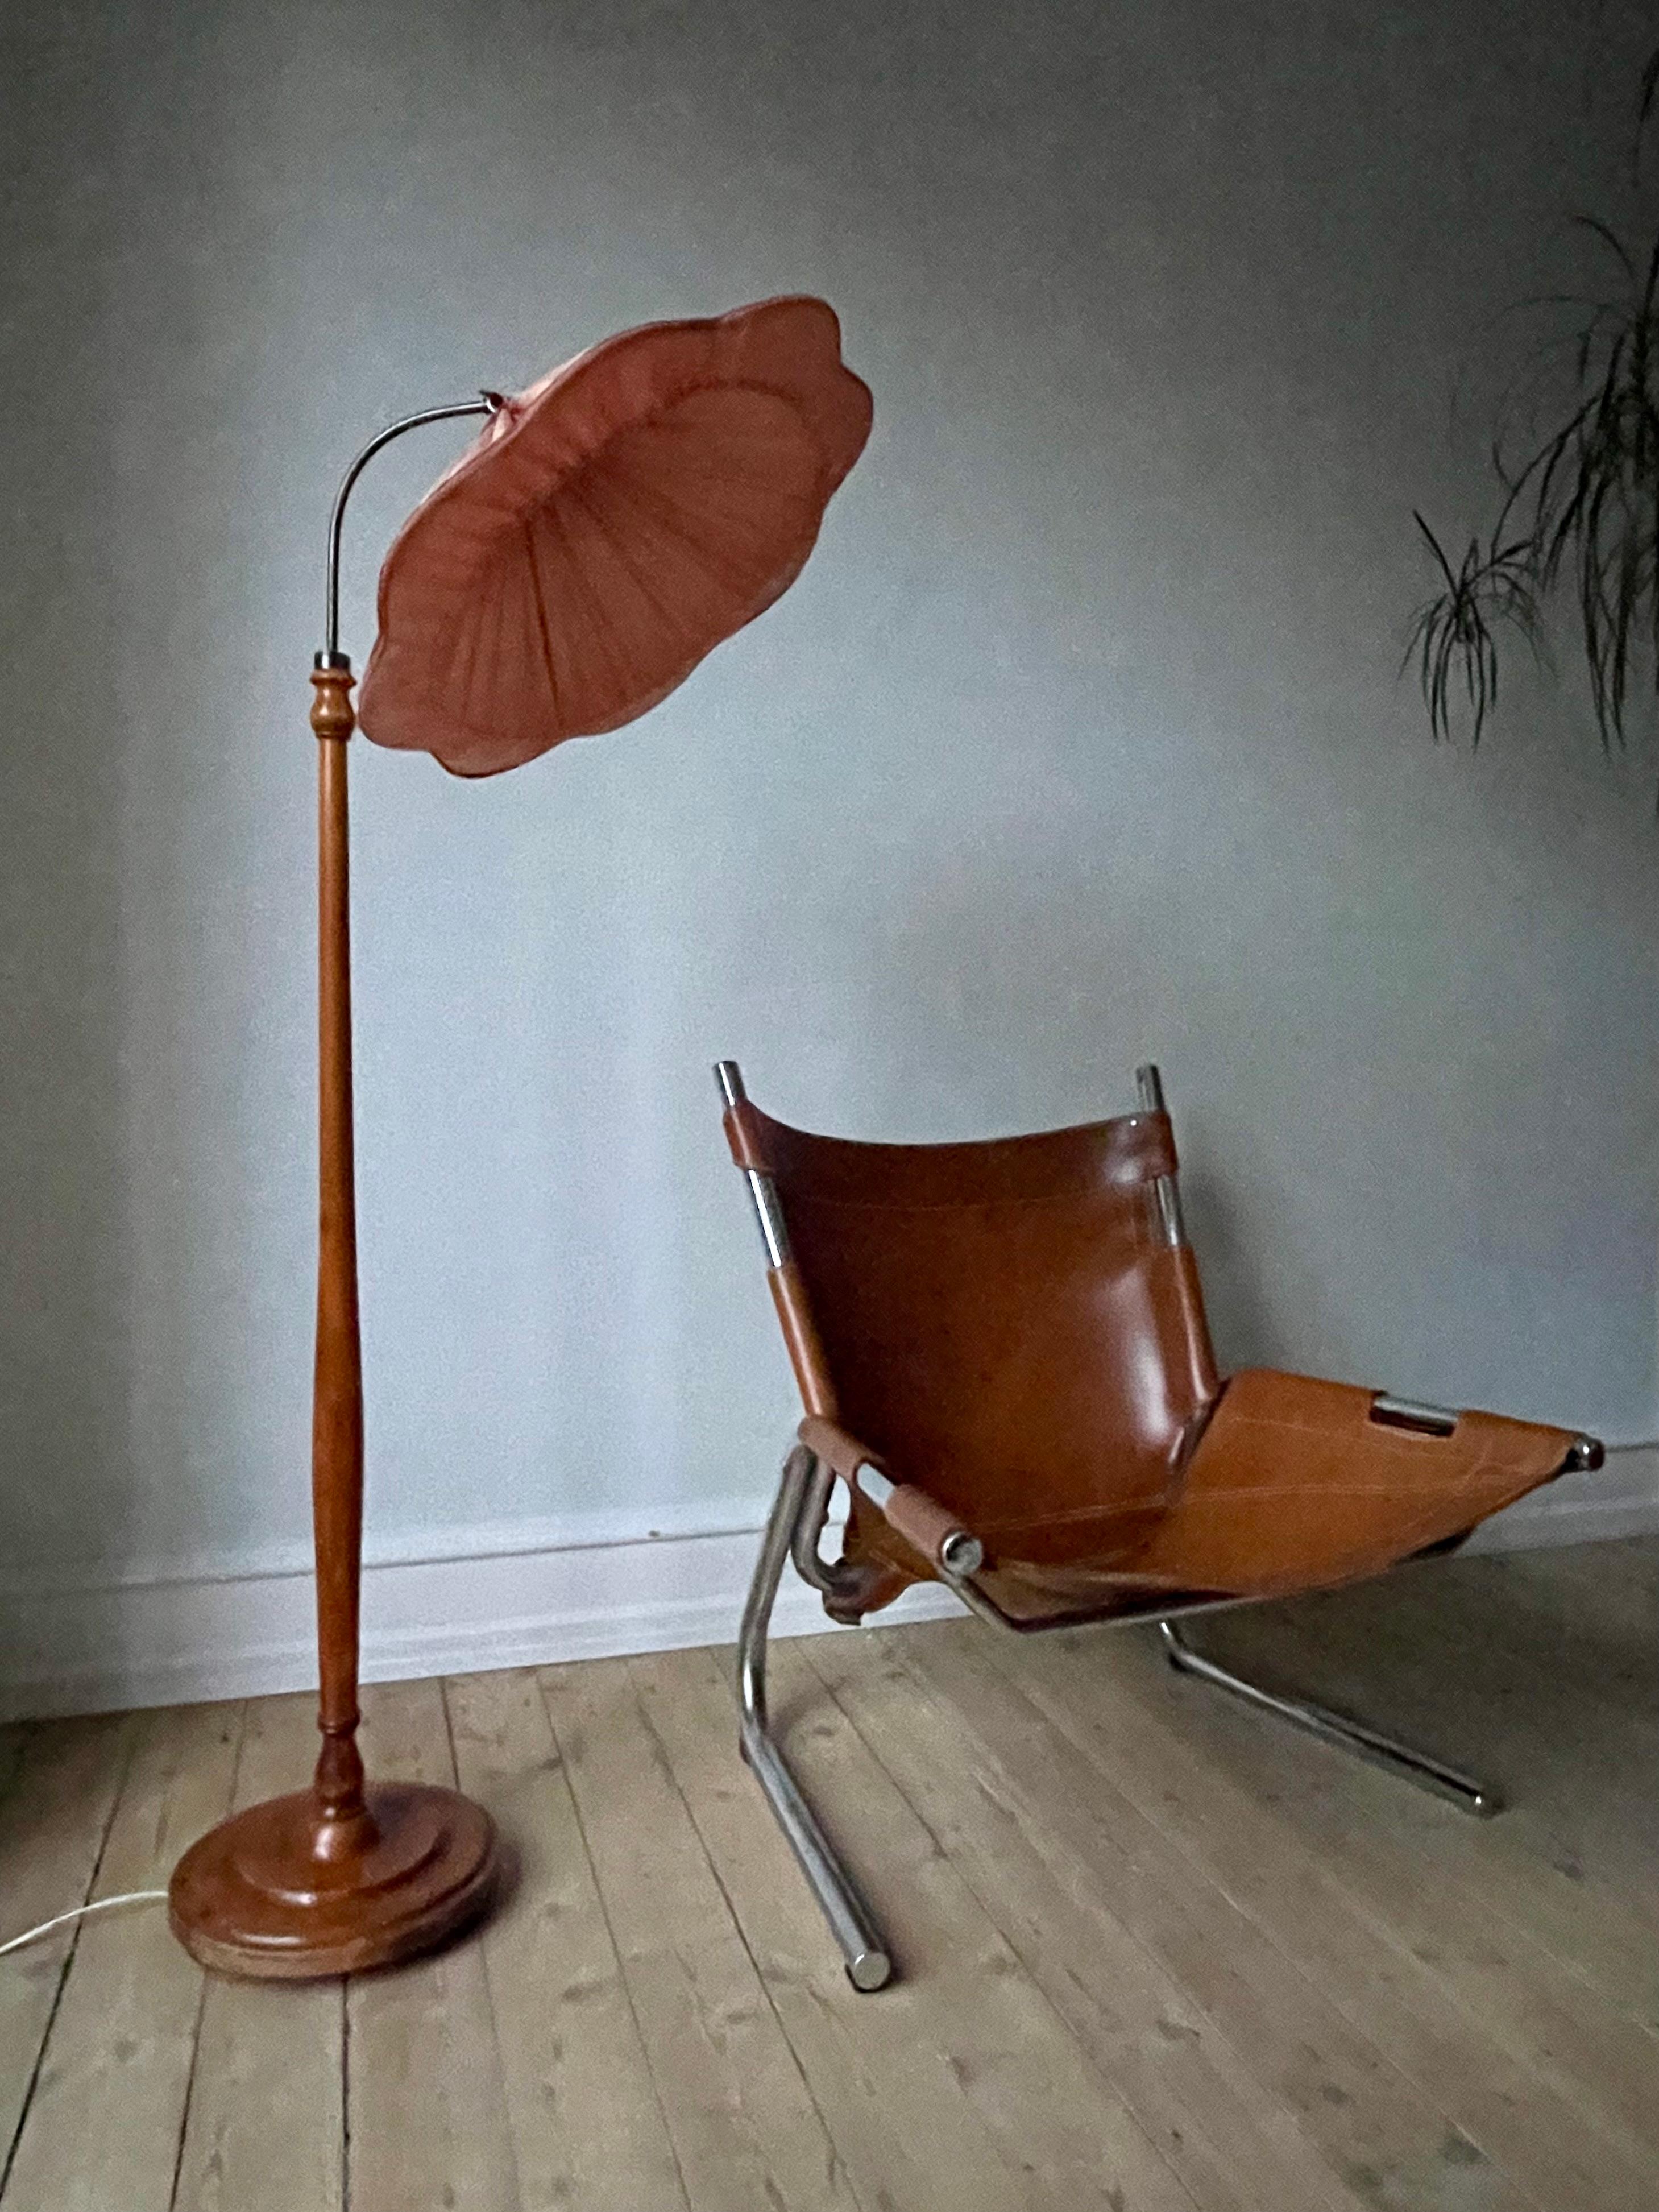 1920s-30s Swedish Grace Art Nouveau floor lamp in the style of Josef Frank, Svenskt Tenn. Original large rose colored fabric lamp shade in a organic flower-like shape 53 cm (21 in) wide. Lacquered wood stem and base with soft relief decorations.